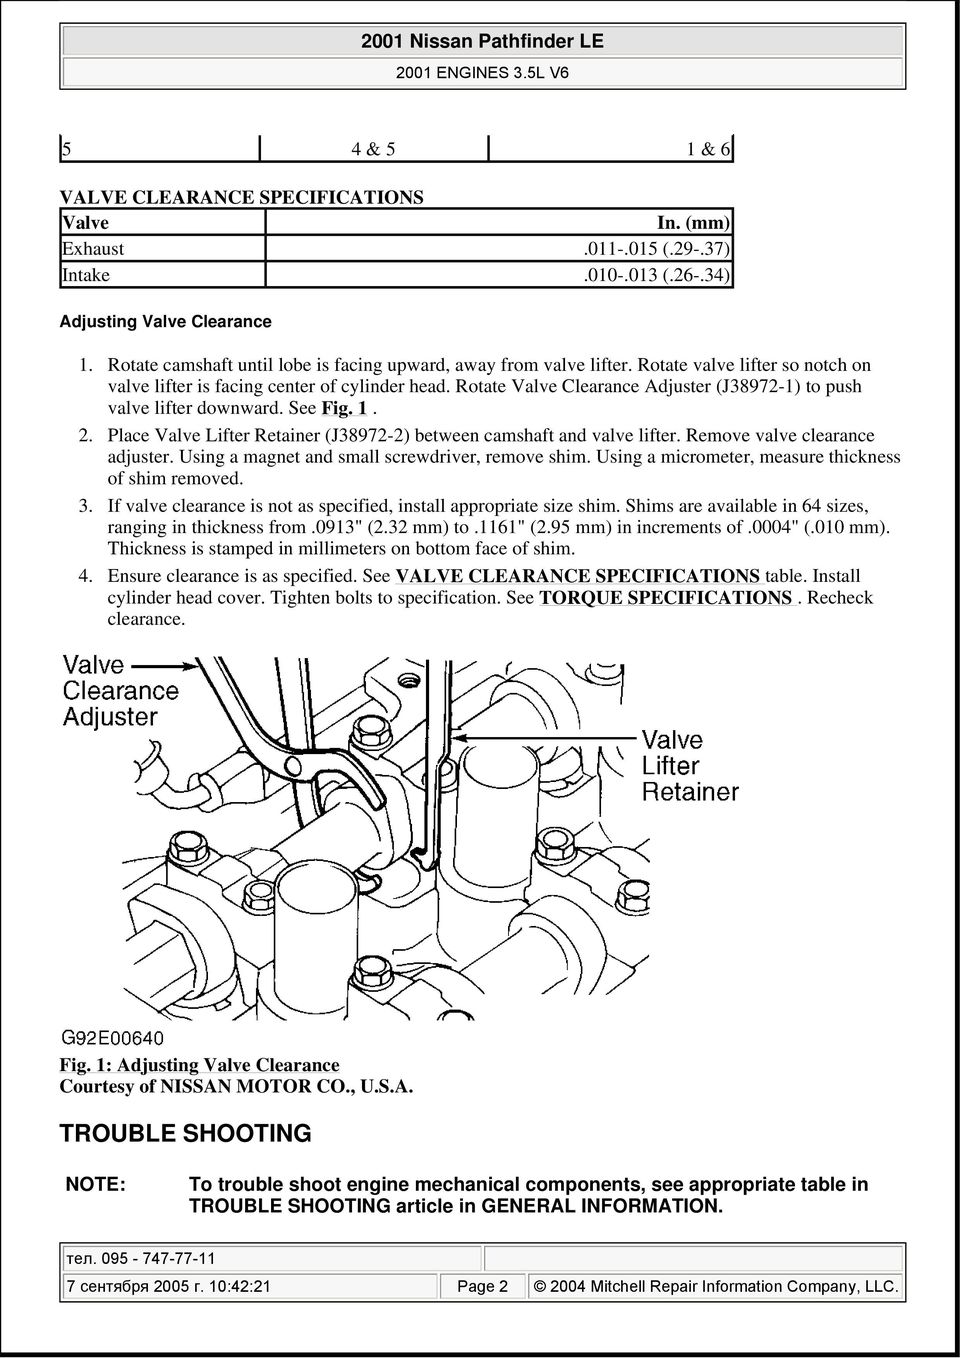 Rotate Valve Clearance Adjuster (J38972-1) to push valve lifter downward. See Fig. 1. 2. Place Valve Lifter Retainer (J38972-2) between camshaft and valve lifter. Remove valve clearance adjuster.